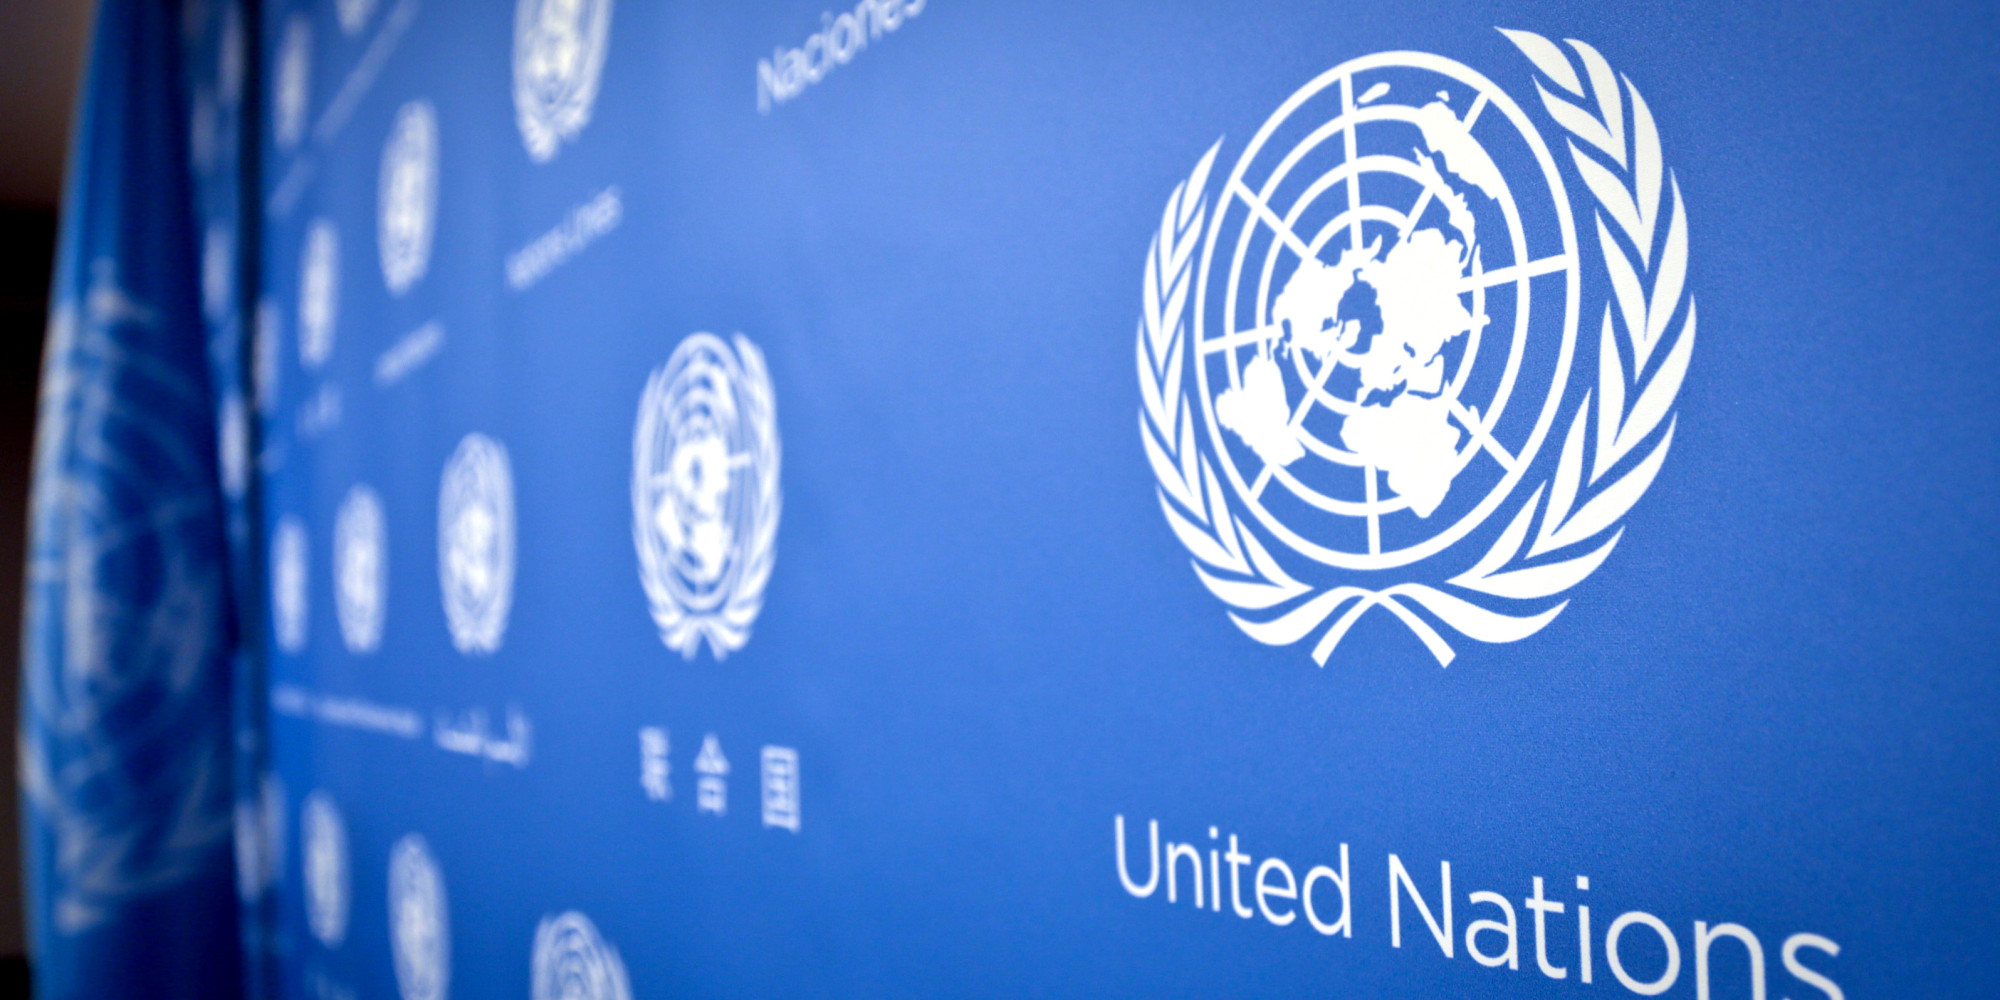 U.N. logo pattern a press conference background at the United Nations headquarters, Tuesday, Sept. 3, 2013.   (AP Photo/Bebeto Matthews)